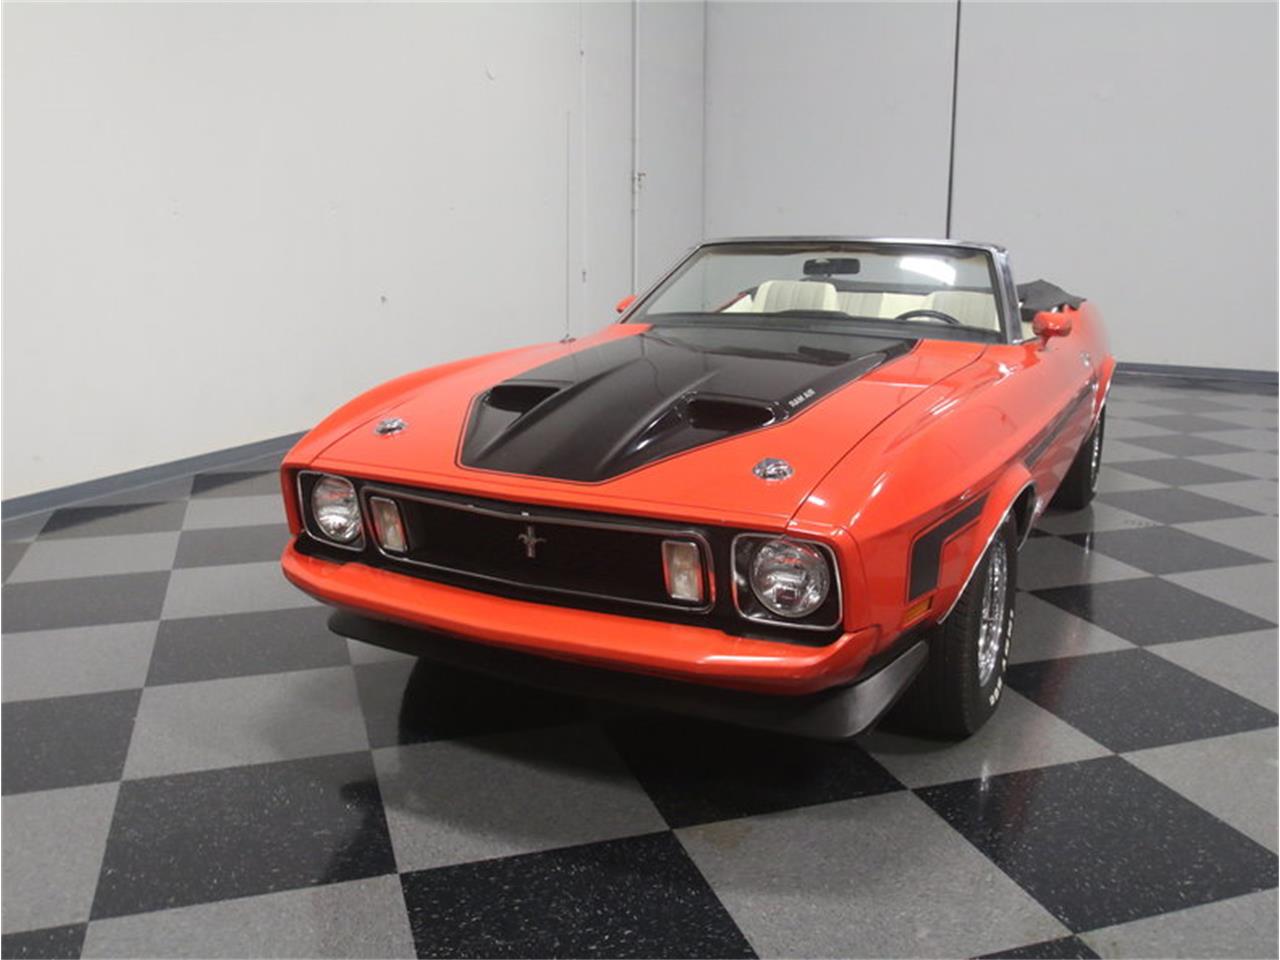 1973 Ford Mustang 351 Cobra Jet for Sale | ClassicCars.com | CC-993827